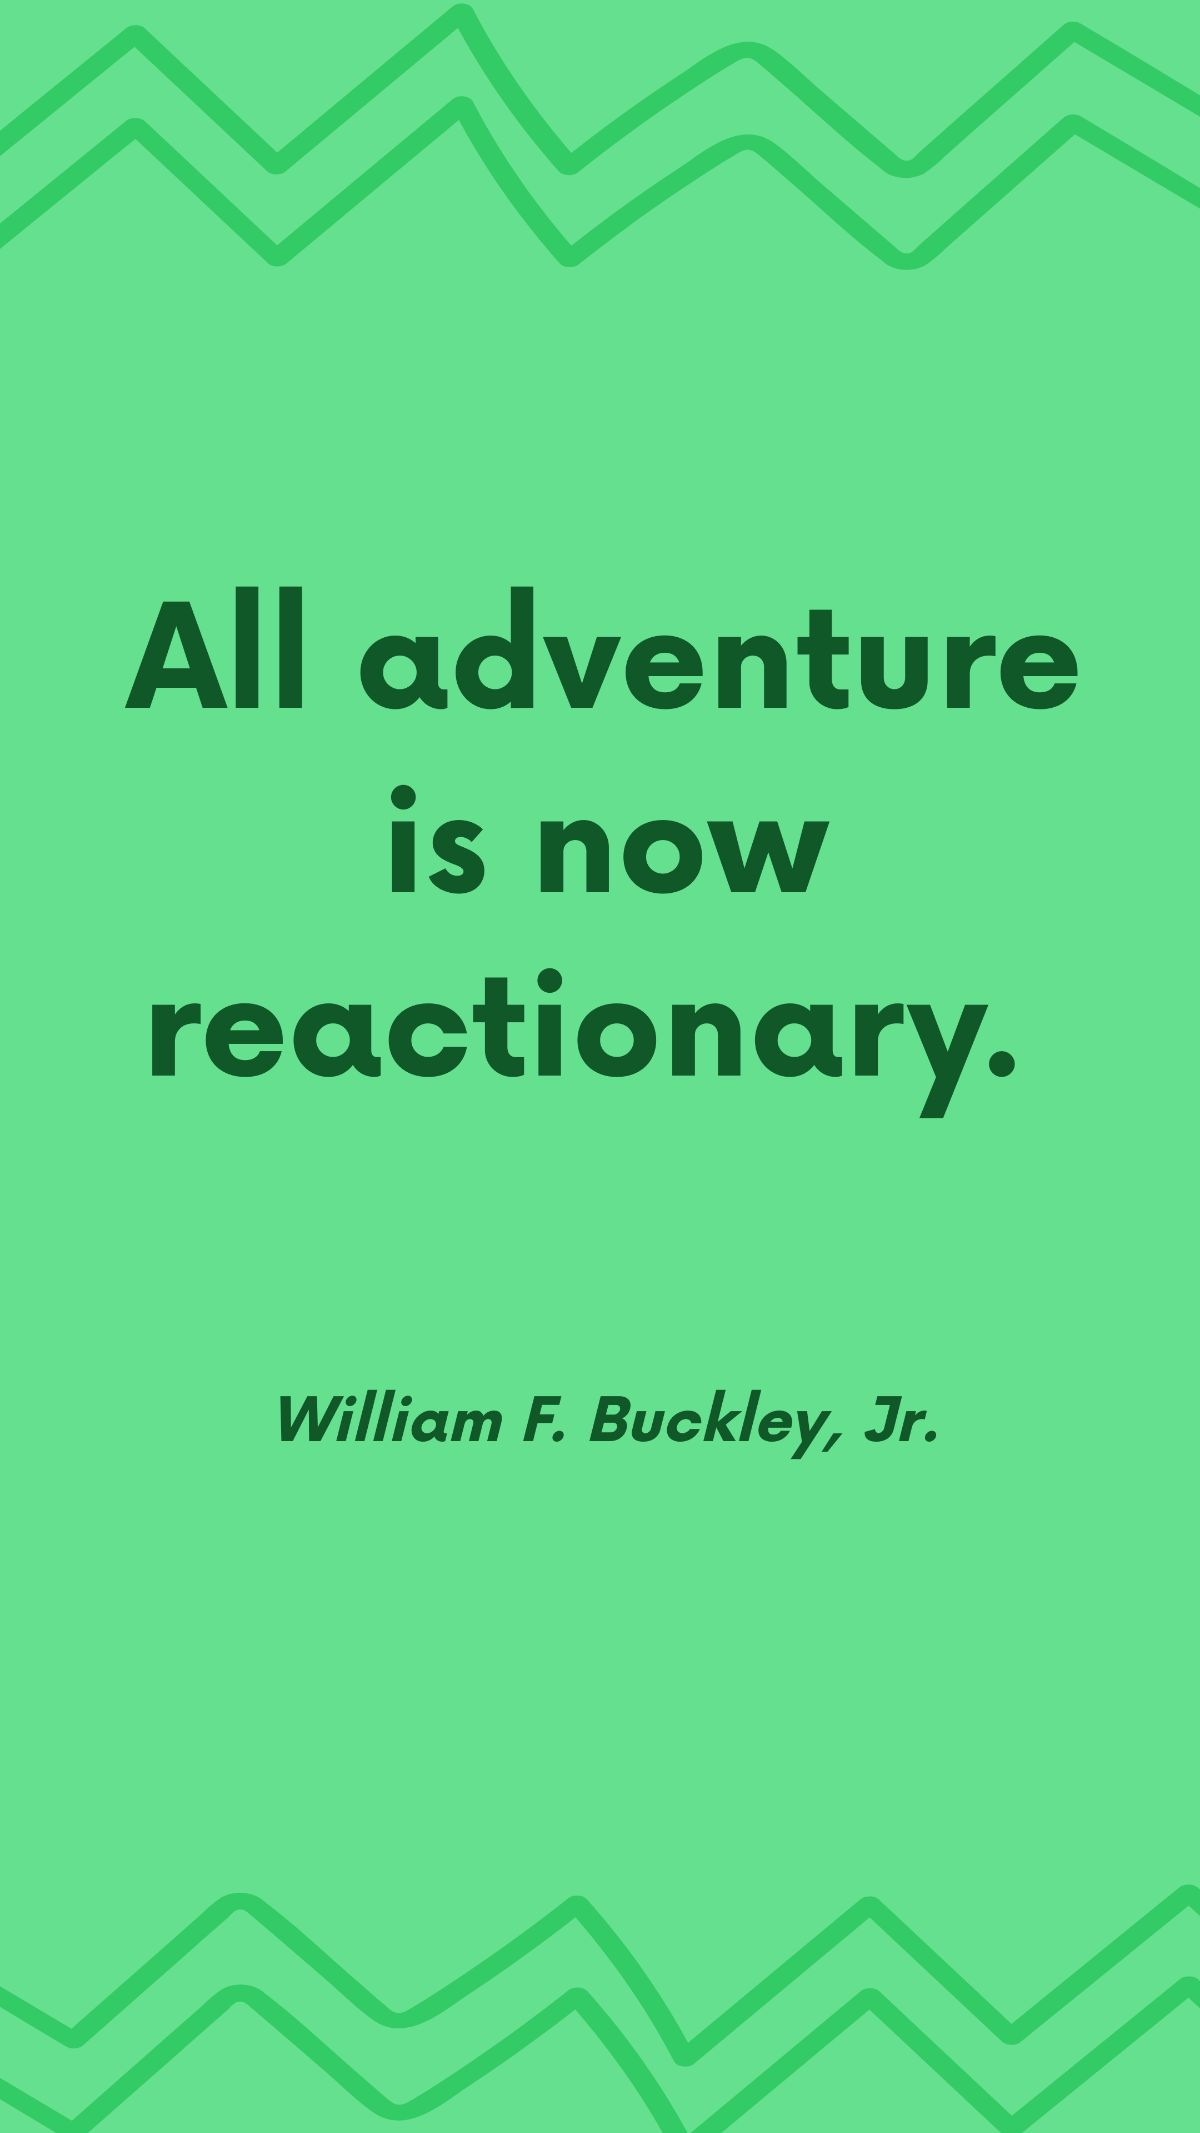 Free William F. Buckley, Jr. - All adventure is now reactionary. Template